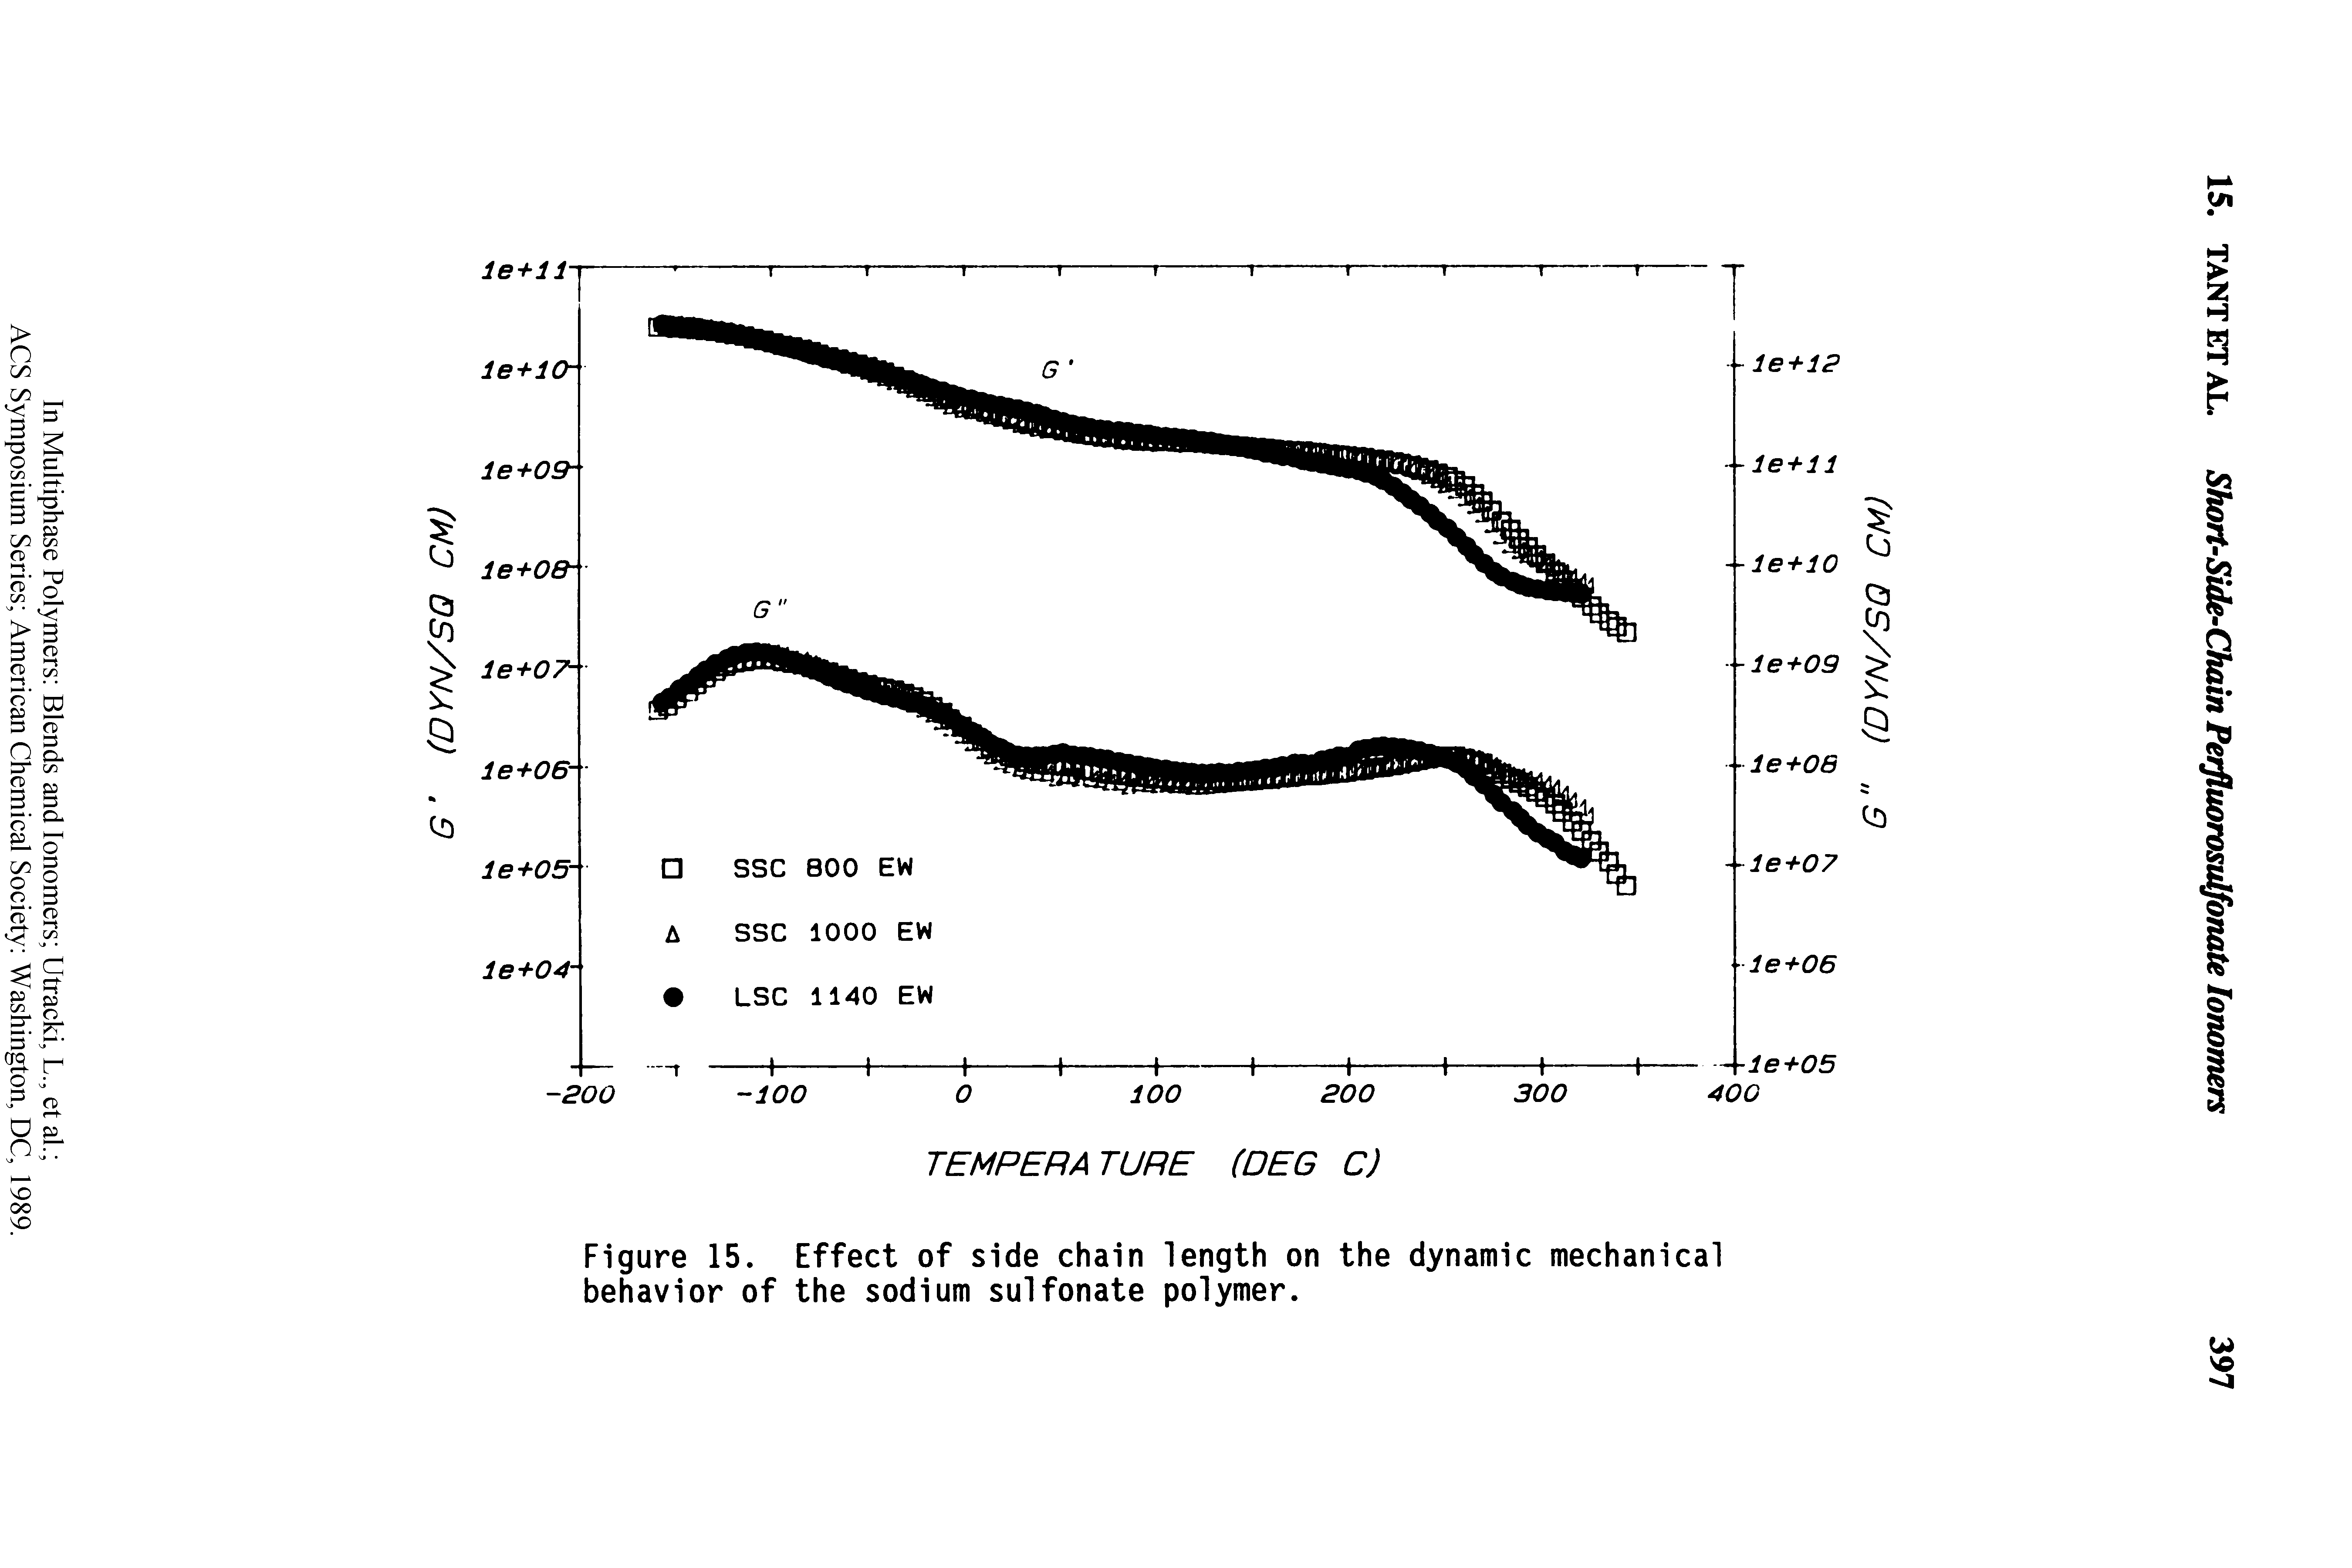 Figure 15. Effect of side chain length on the dynamic mechanical behavior of the sodium sulfonate polymer.